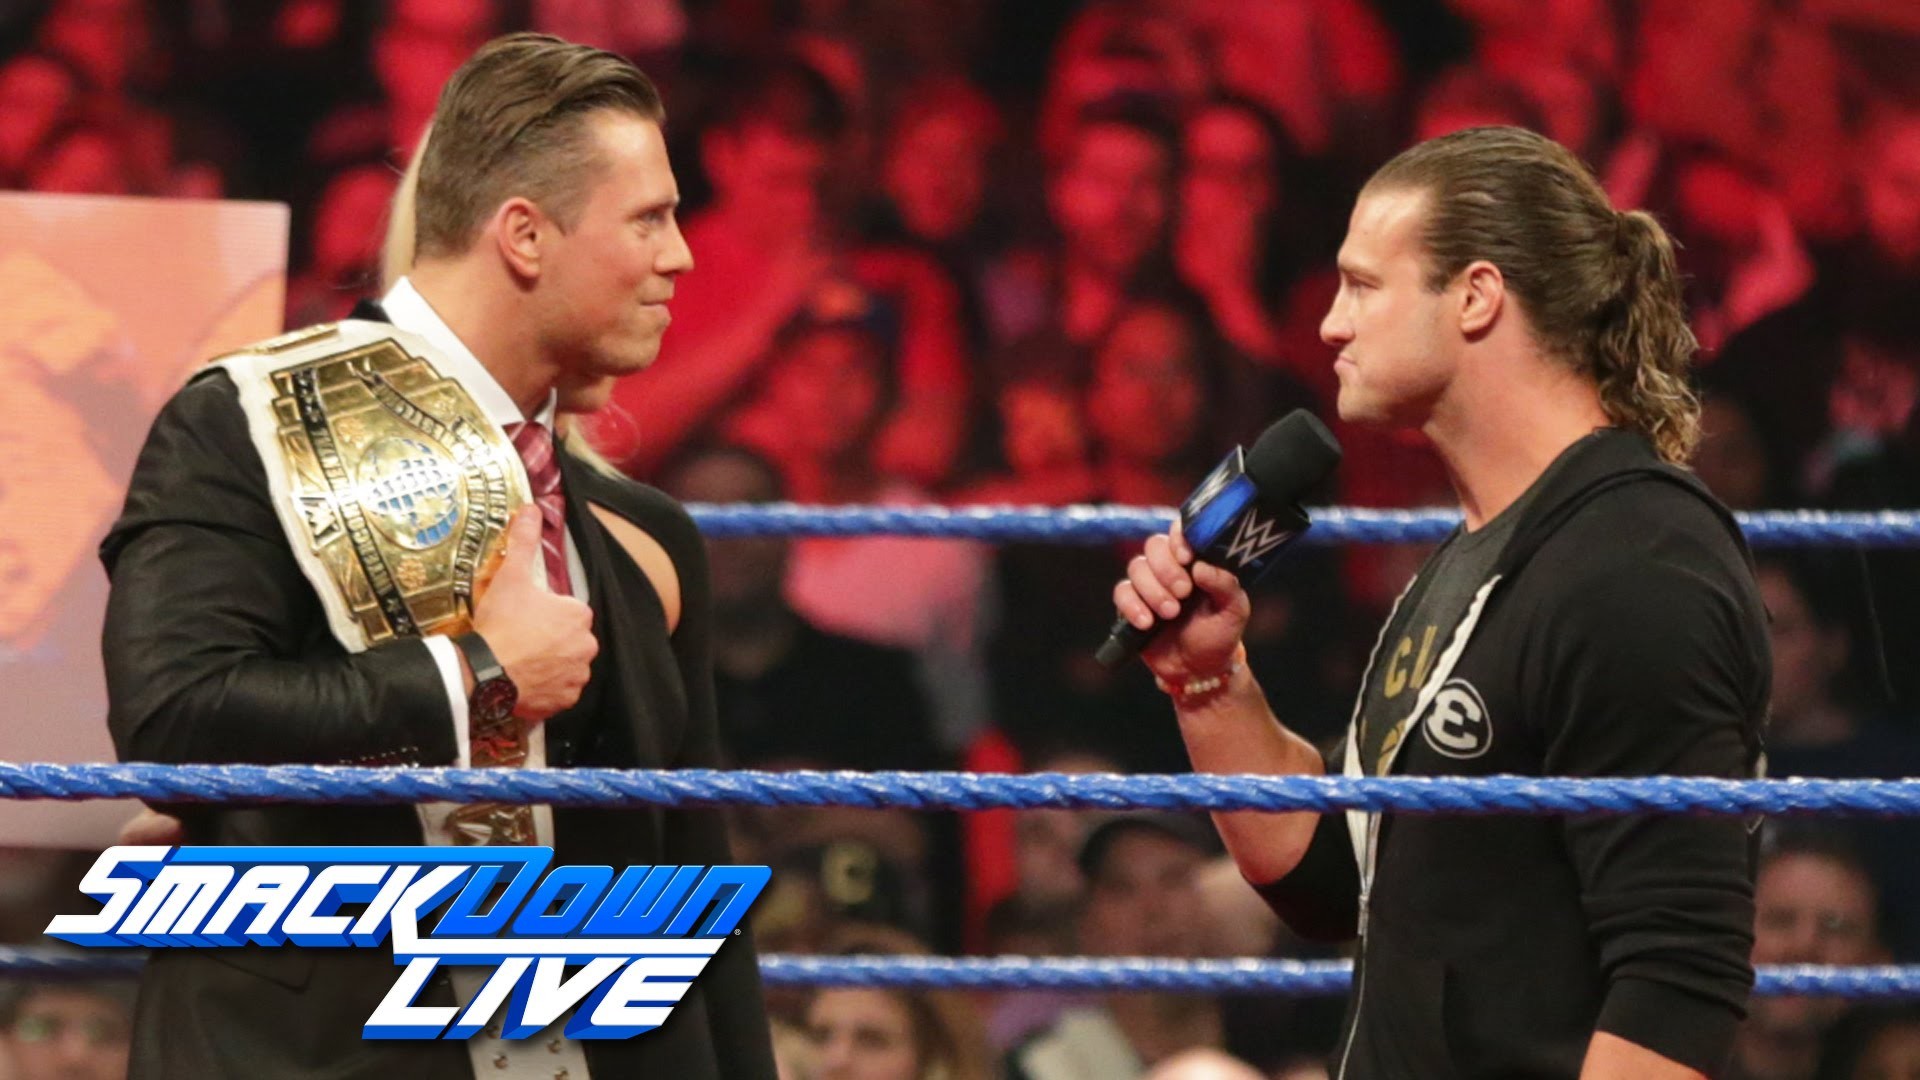 1920x1080 The Miz's Homecoming Celebration leads to a career-altering showdown:  SmackDown LIVE, Sept. 27, 2016